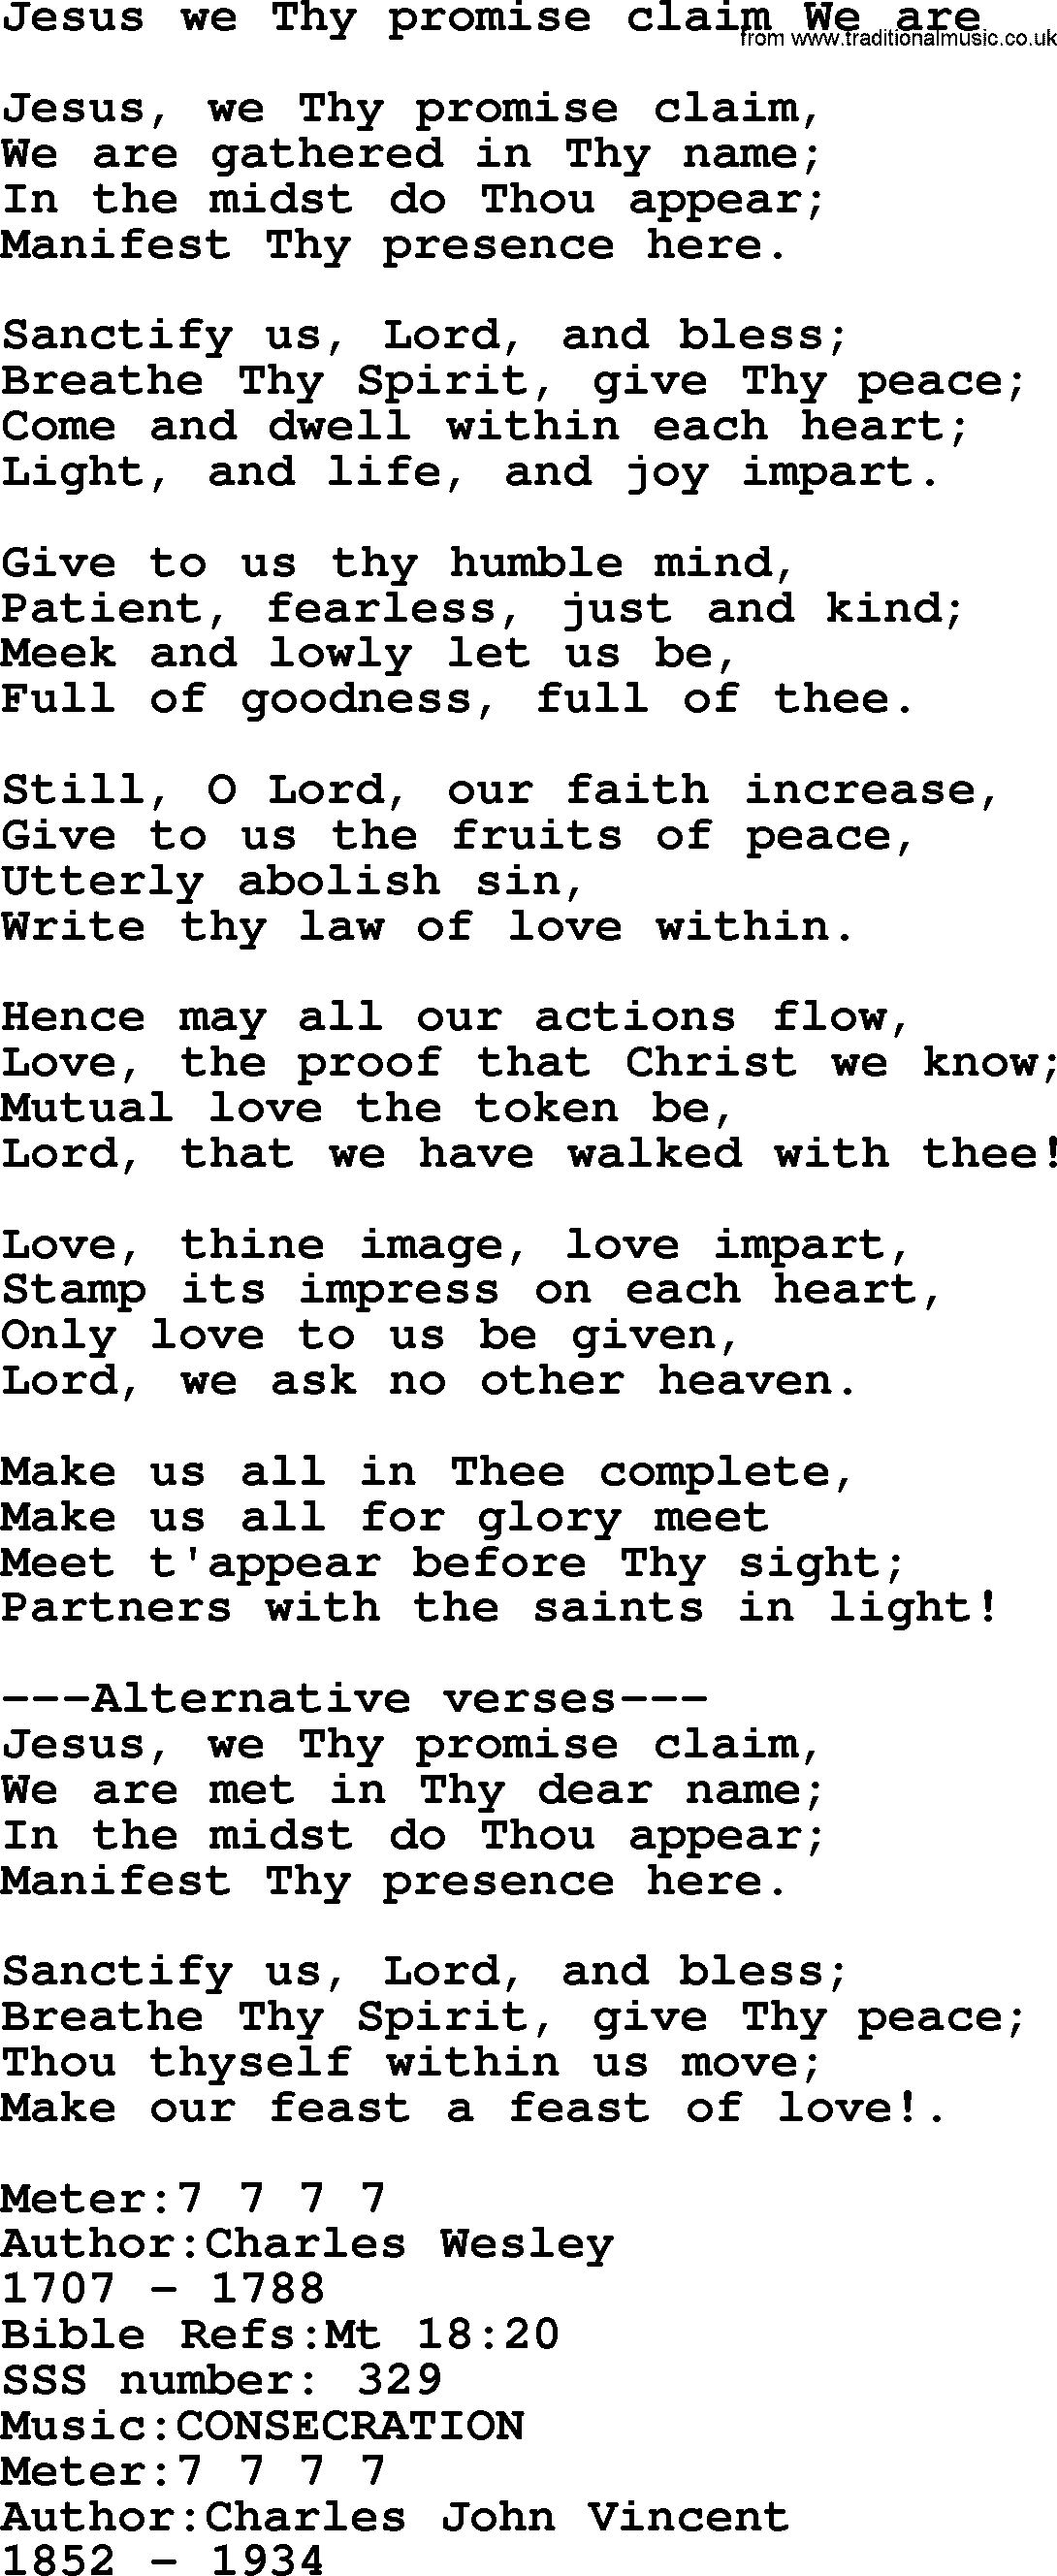 Sacred Songs and Solos complete, 1200 Hymns, title: Jesus We Thy Promise Claim We Are, lyrics and PDF